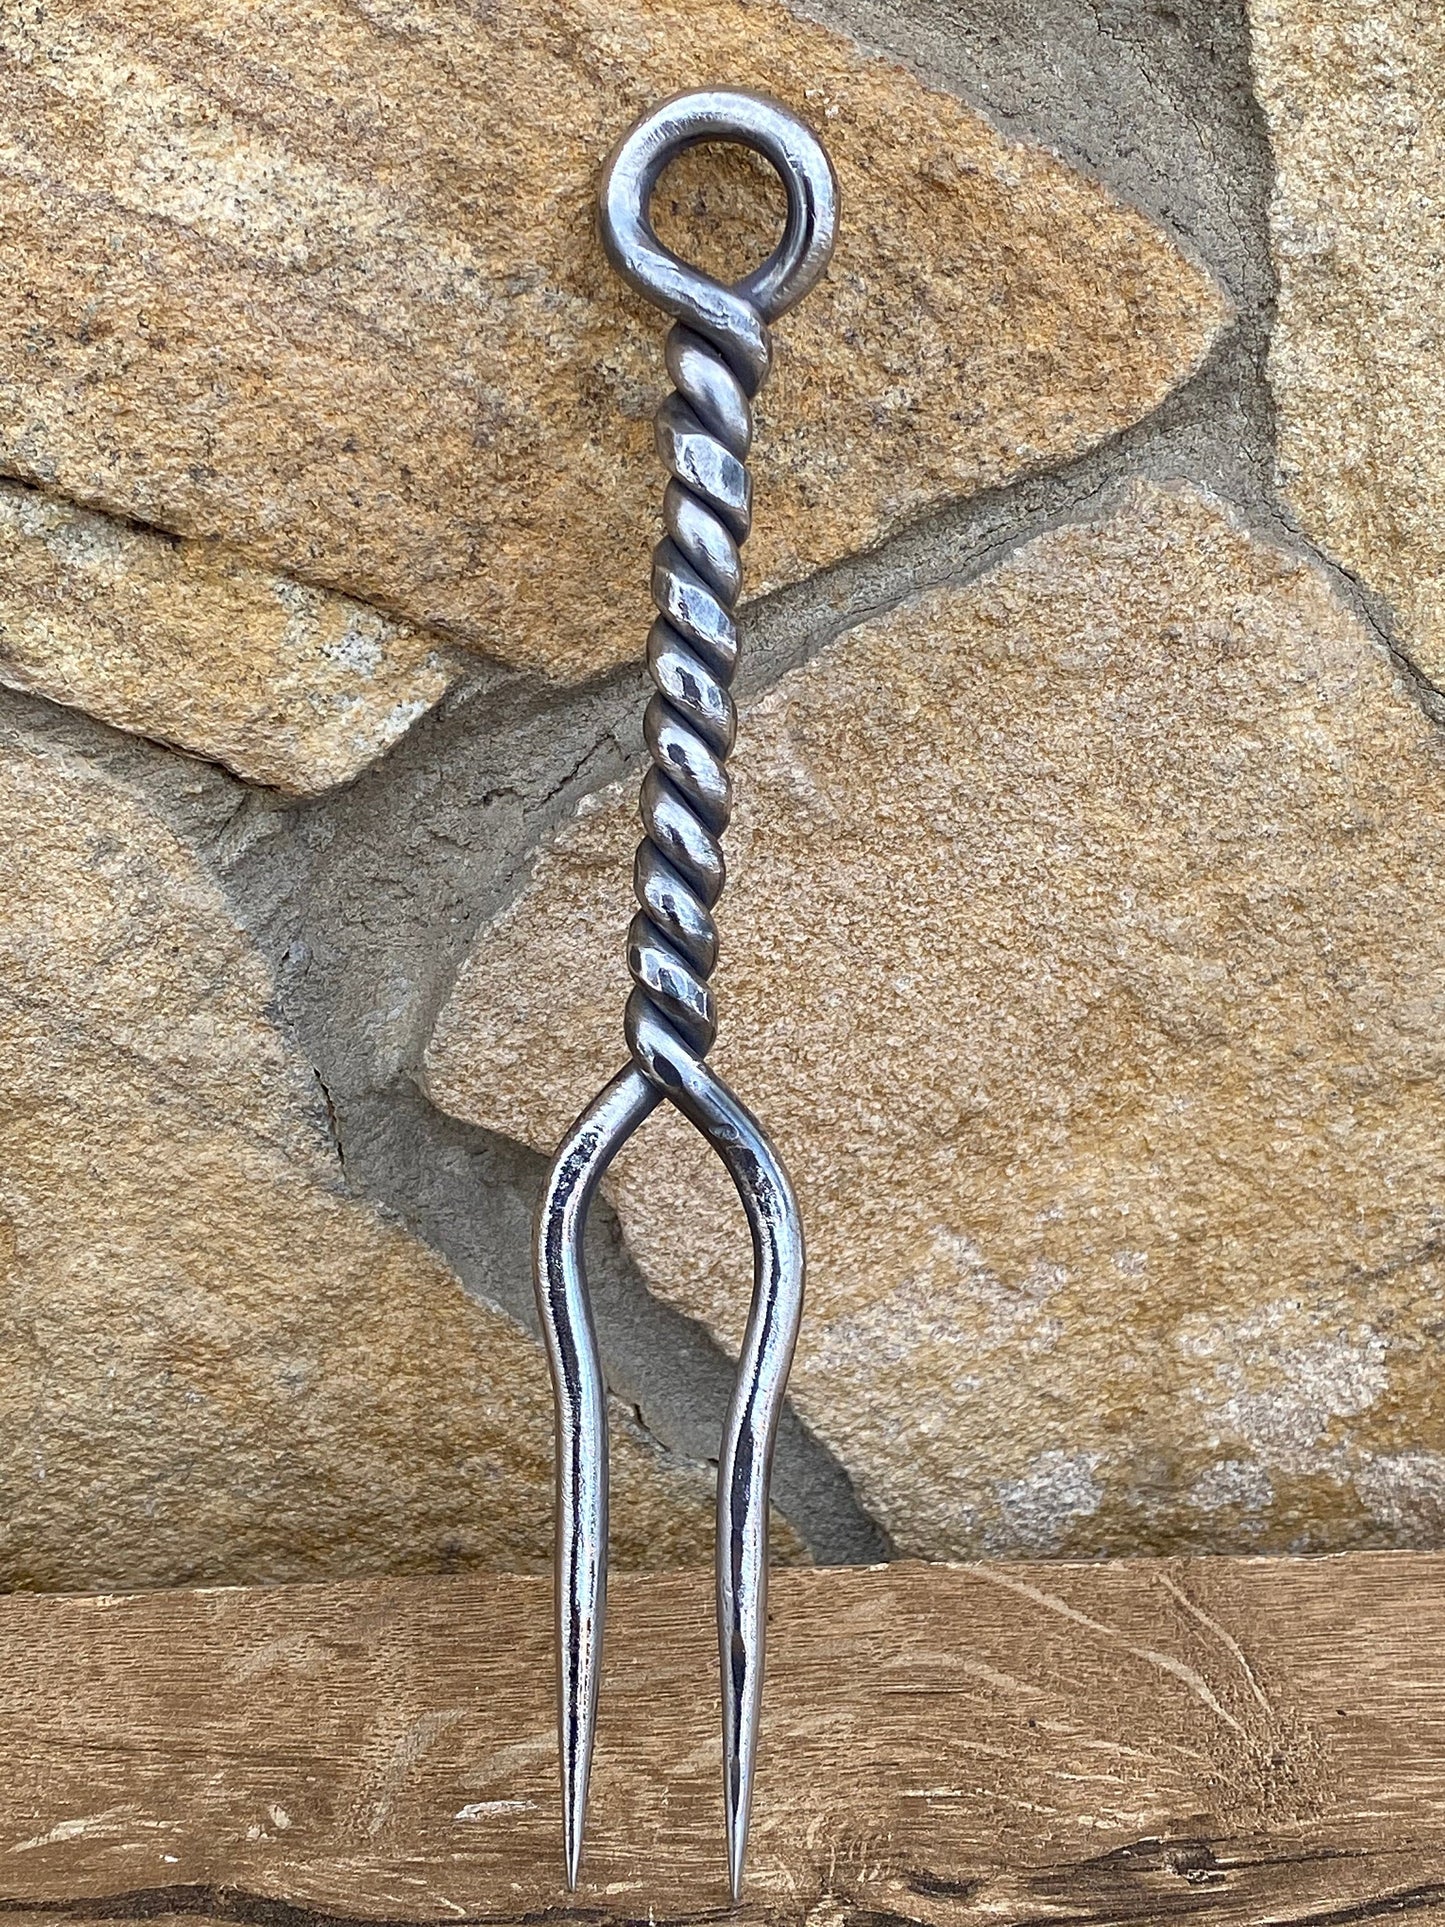 Stainless steel BBQ fork, BBQ fork, BBQ, viking fork, hand forged fork, rustic fork, medieval fork, barbeque gift, kitchen, grill, birthday